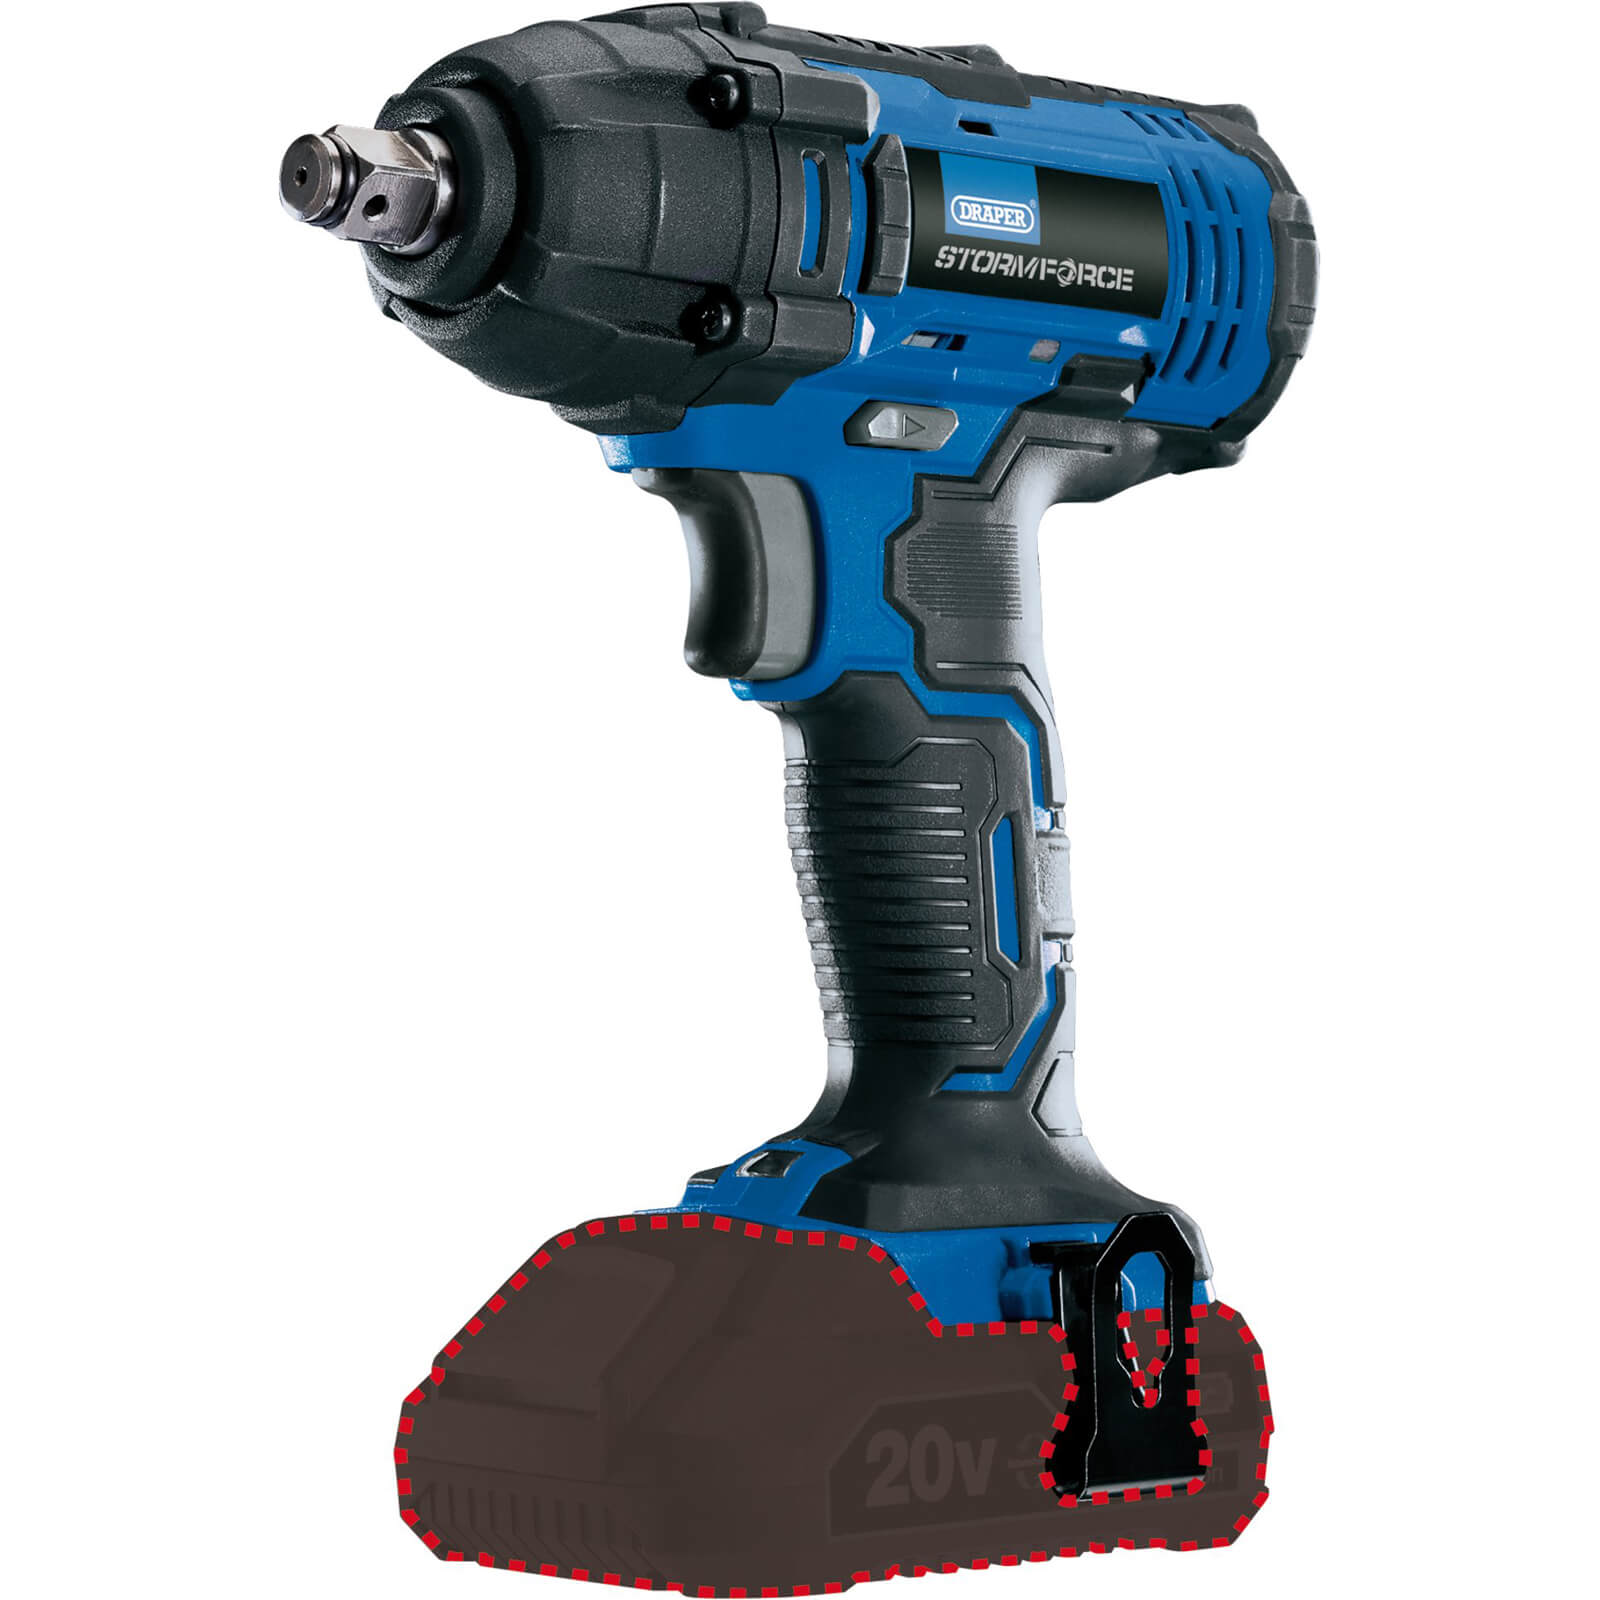 Photo of Draper Ciw20sf Storm Force 20v 1/2 Drive Impact Wrench No Batteries No Charger No Case